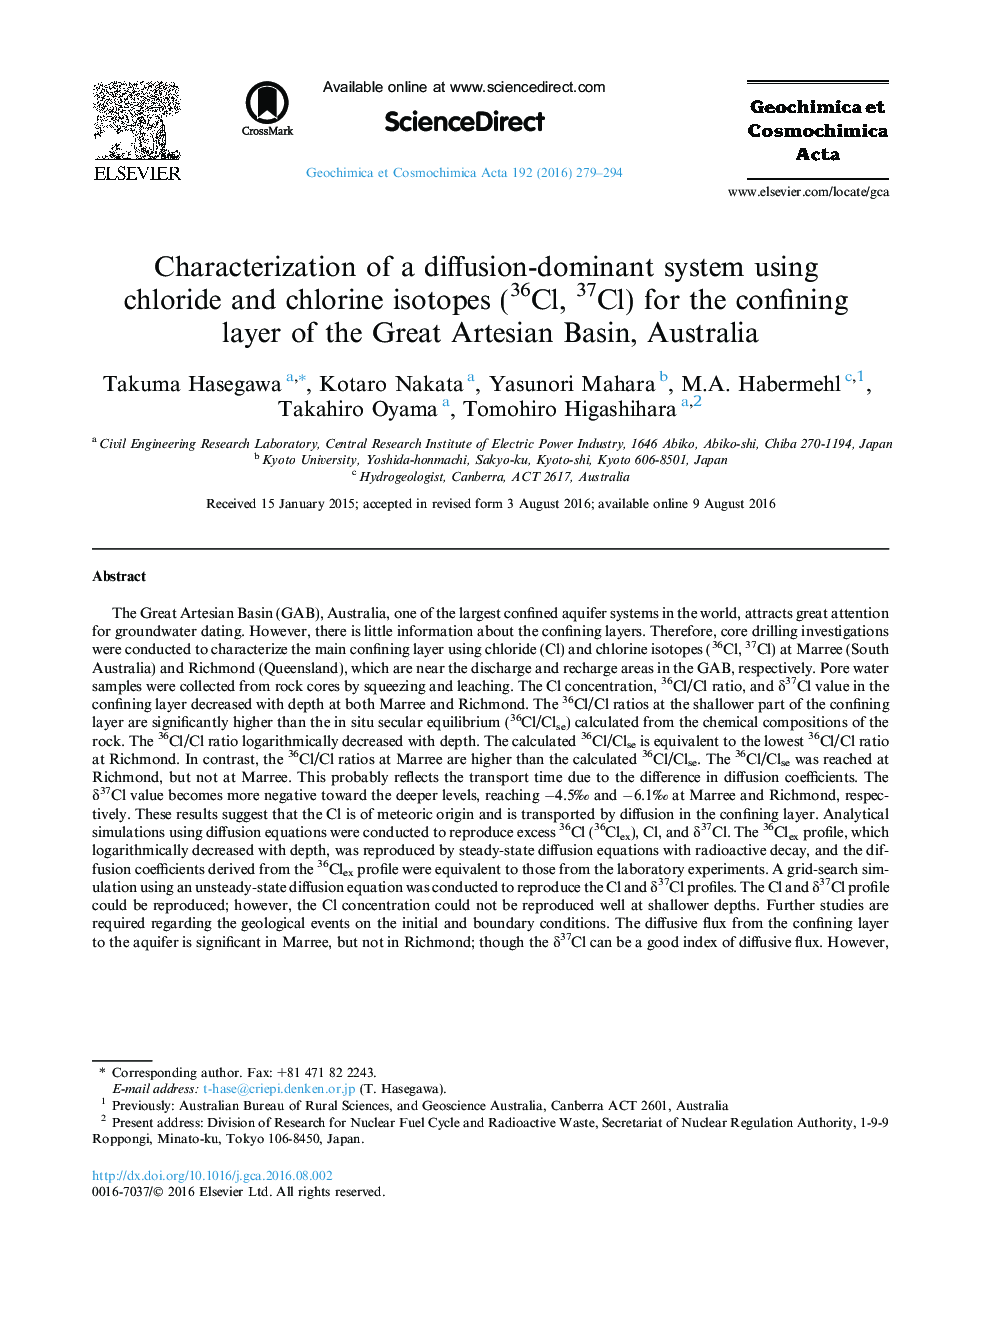 Characterization of a diffusion-dominant system using chloride and chlorine isotopes (36Cl, 37Cl) for the confining layer of the Great Artesian Basin, Australia